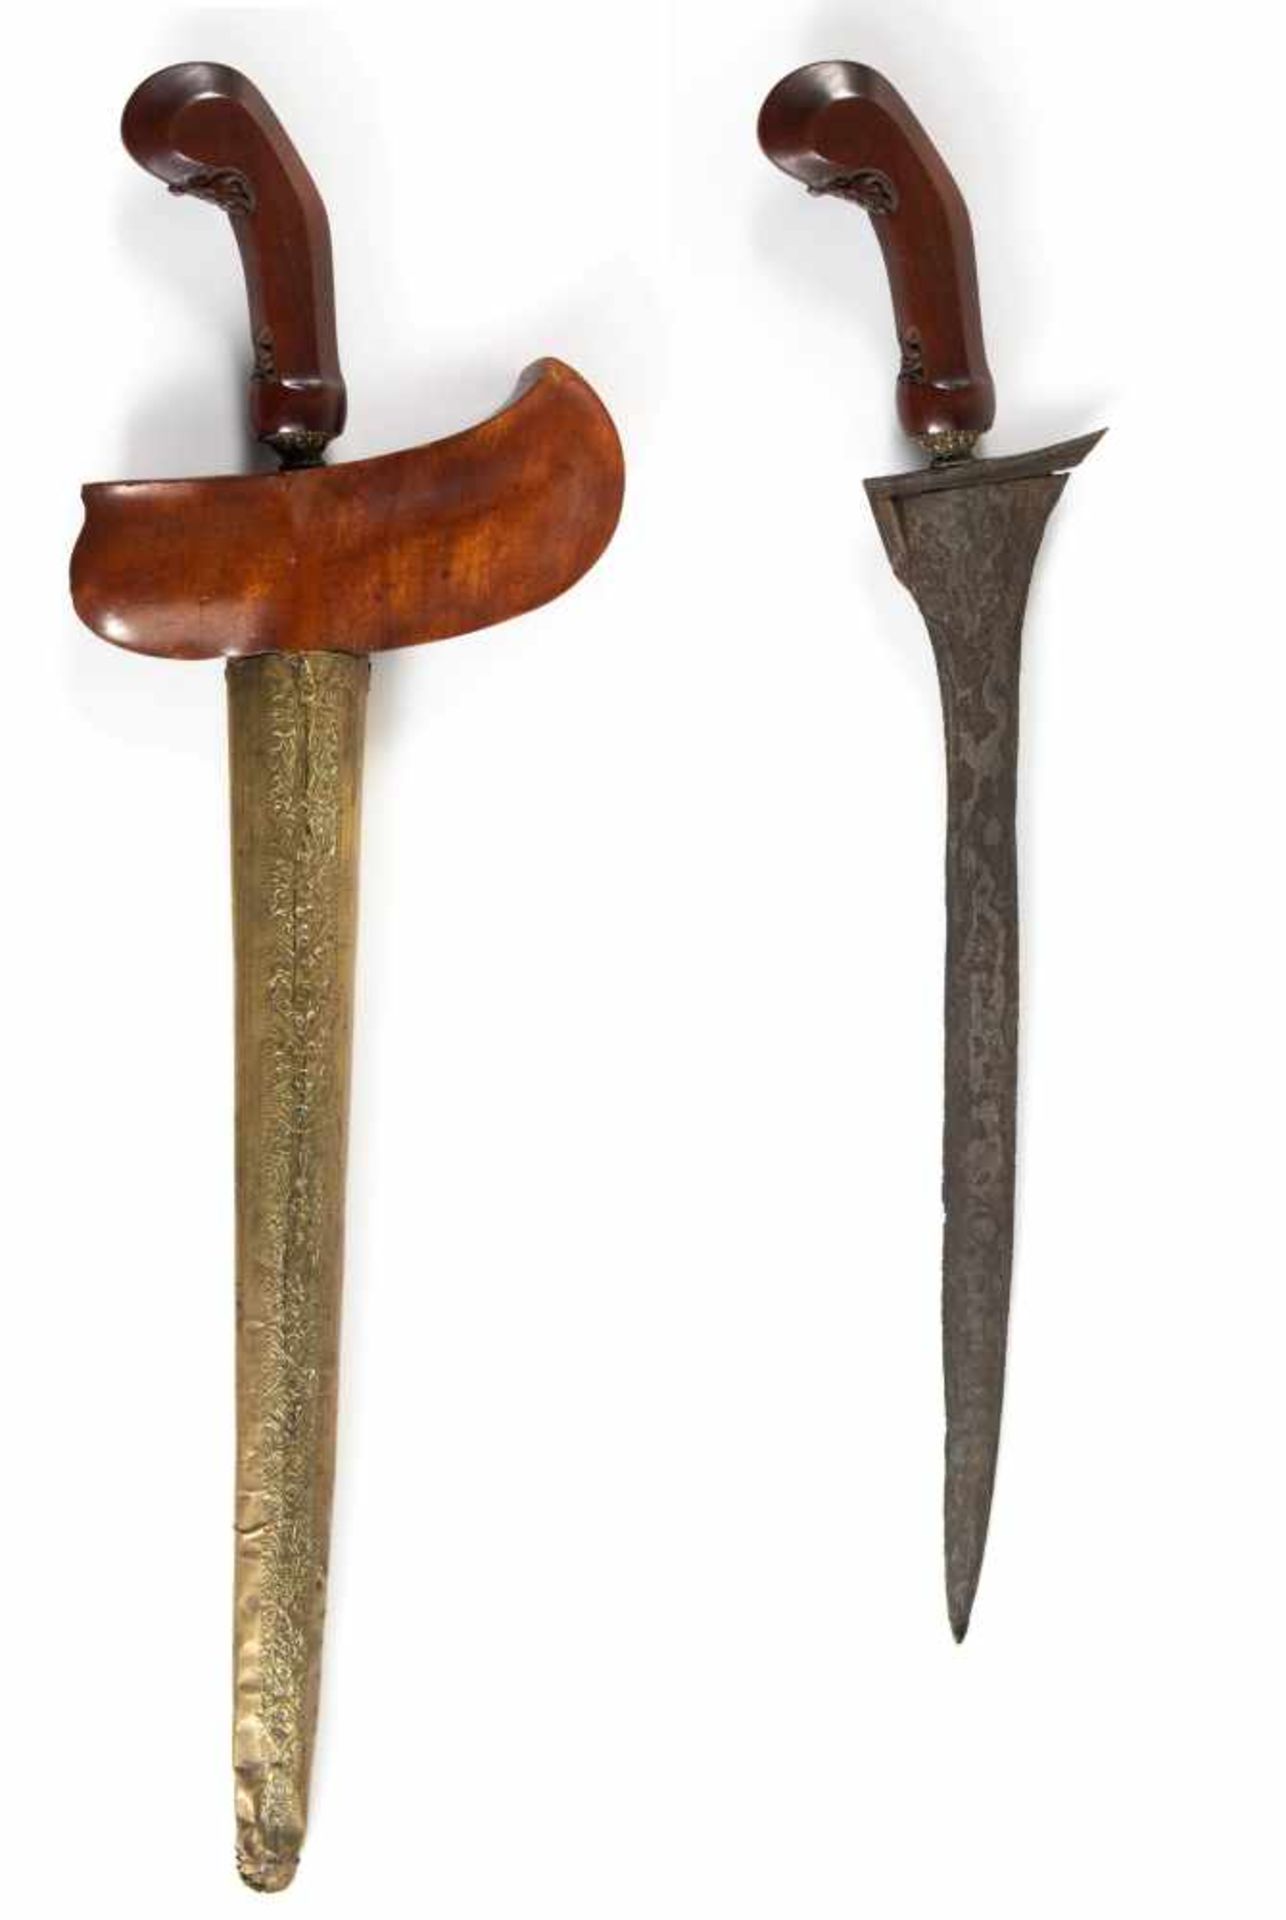 A Javanese Keris Solo, with 17th century blade.pattern.Length of the blade, including ‘Pesi’ (tang